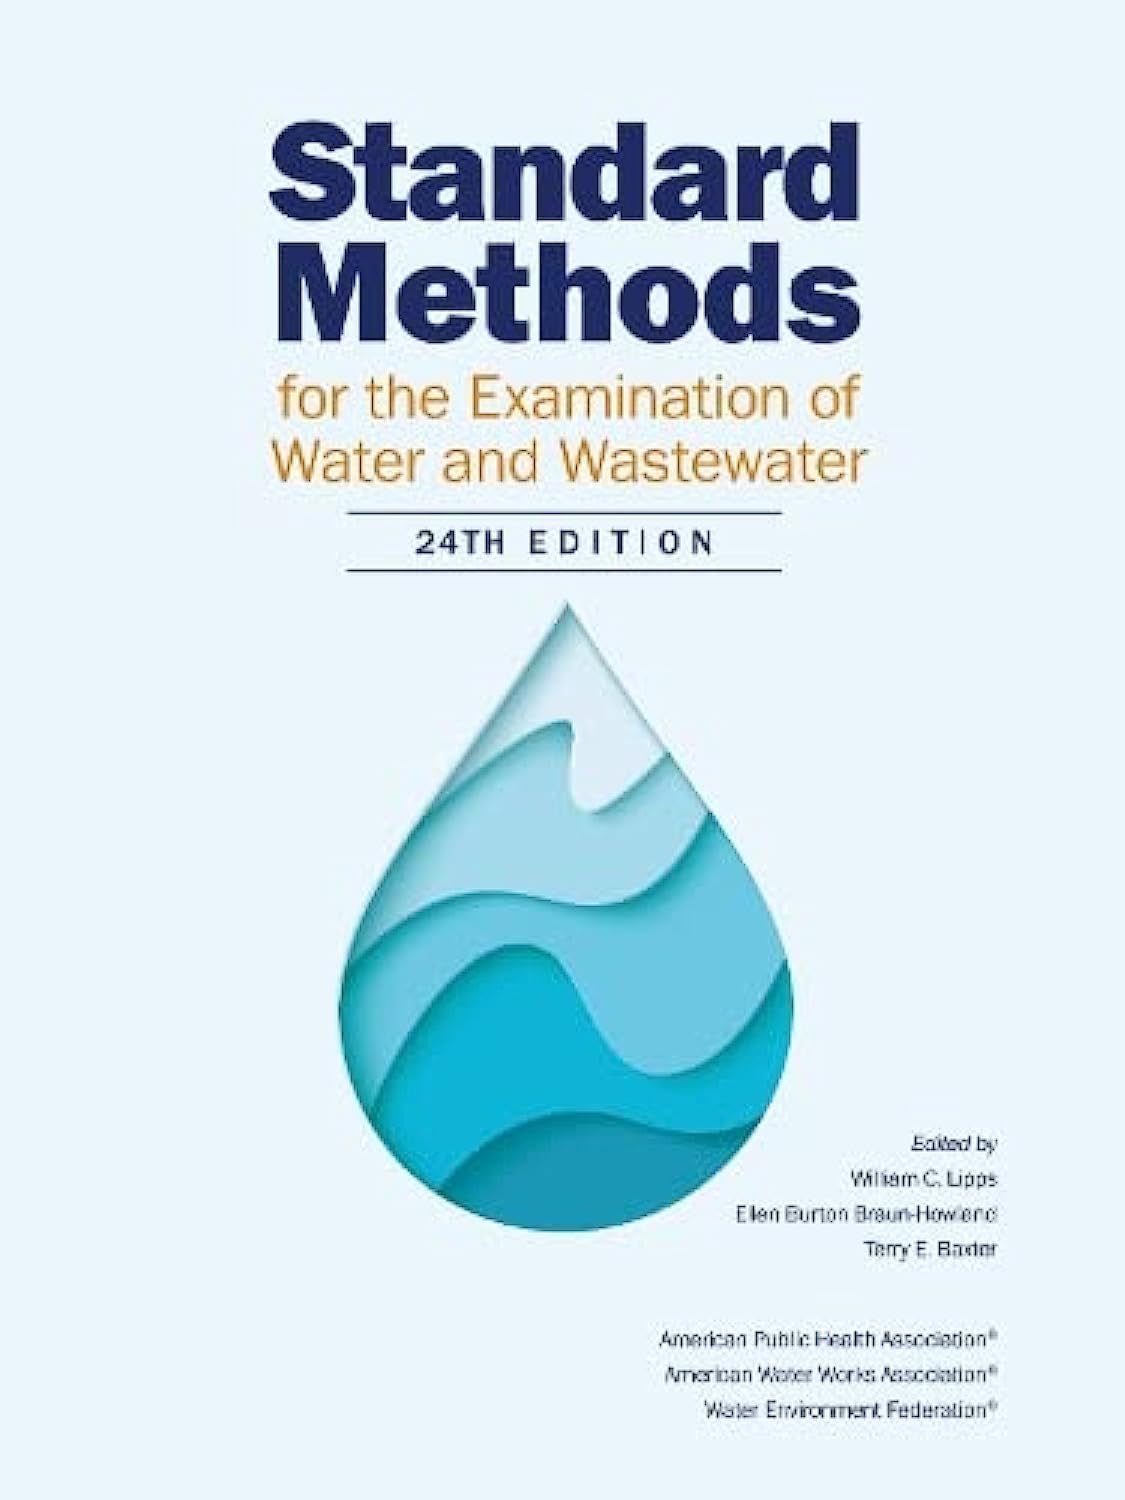 Standard Methods for the Examination of Water and Wastewater 24th Edition